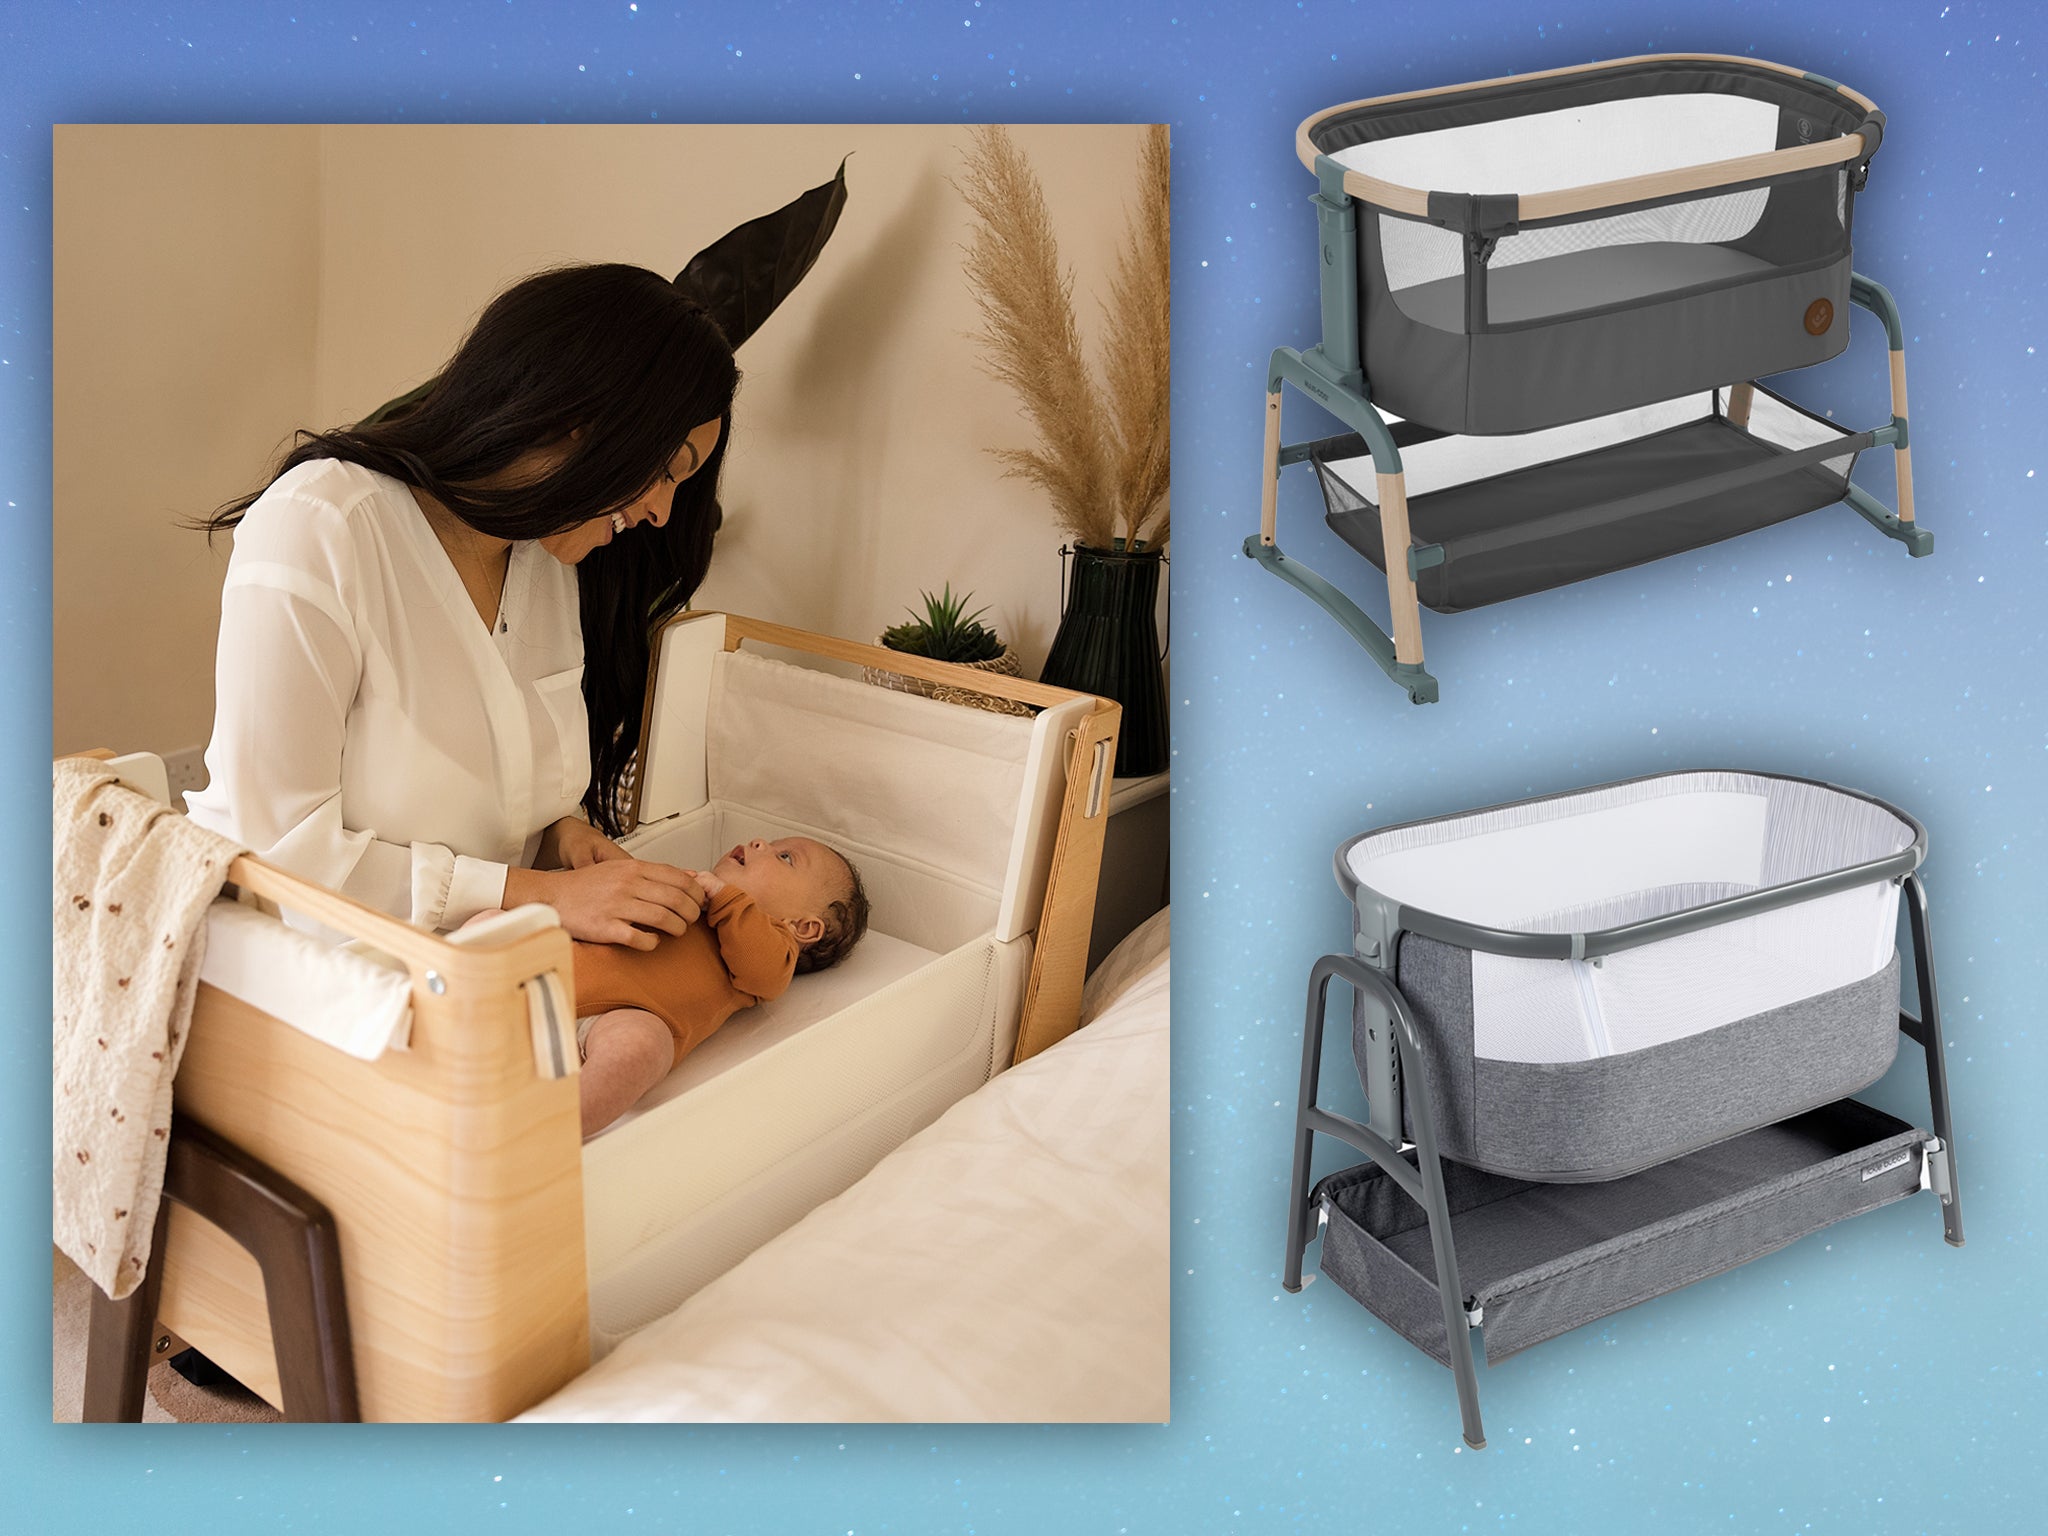 Helpful features cover everything from soothing rocking mechanisms to incline options for easing reflux